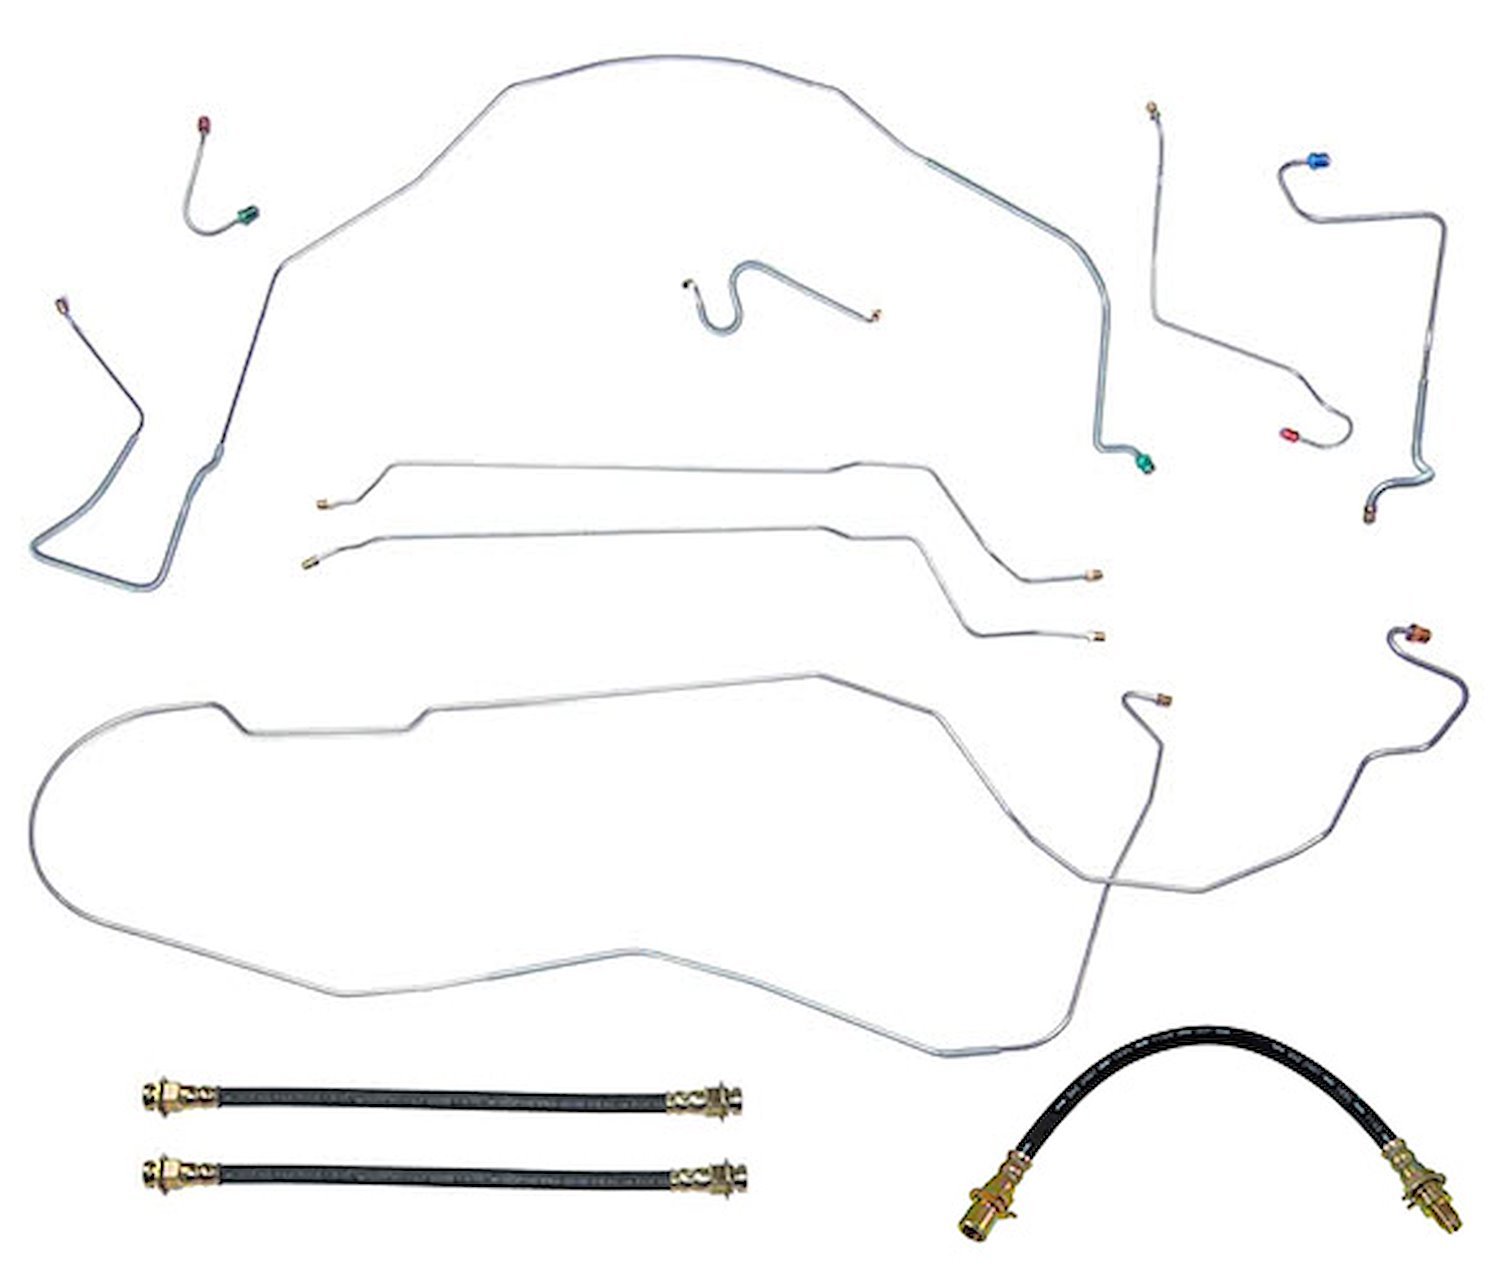 Complete Brake Line & Hose Kit for 1967 Chevy Chevelle, Malibu SS Hardtop w/Power Disc Brakes [Stainless Steel]